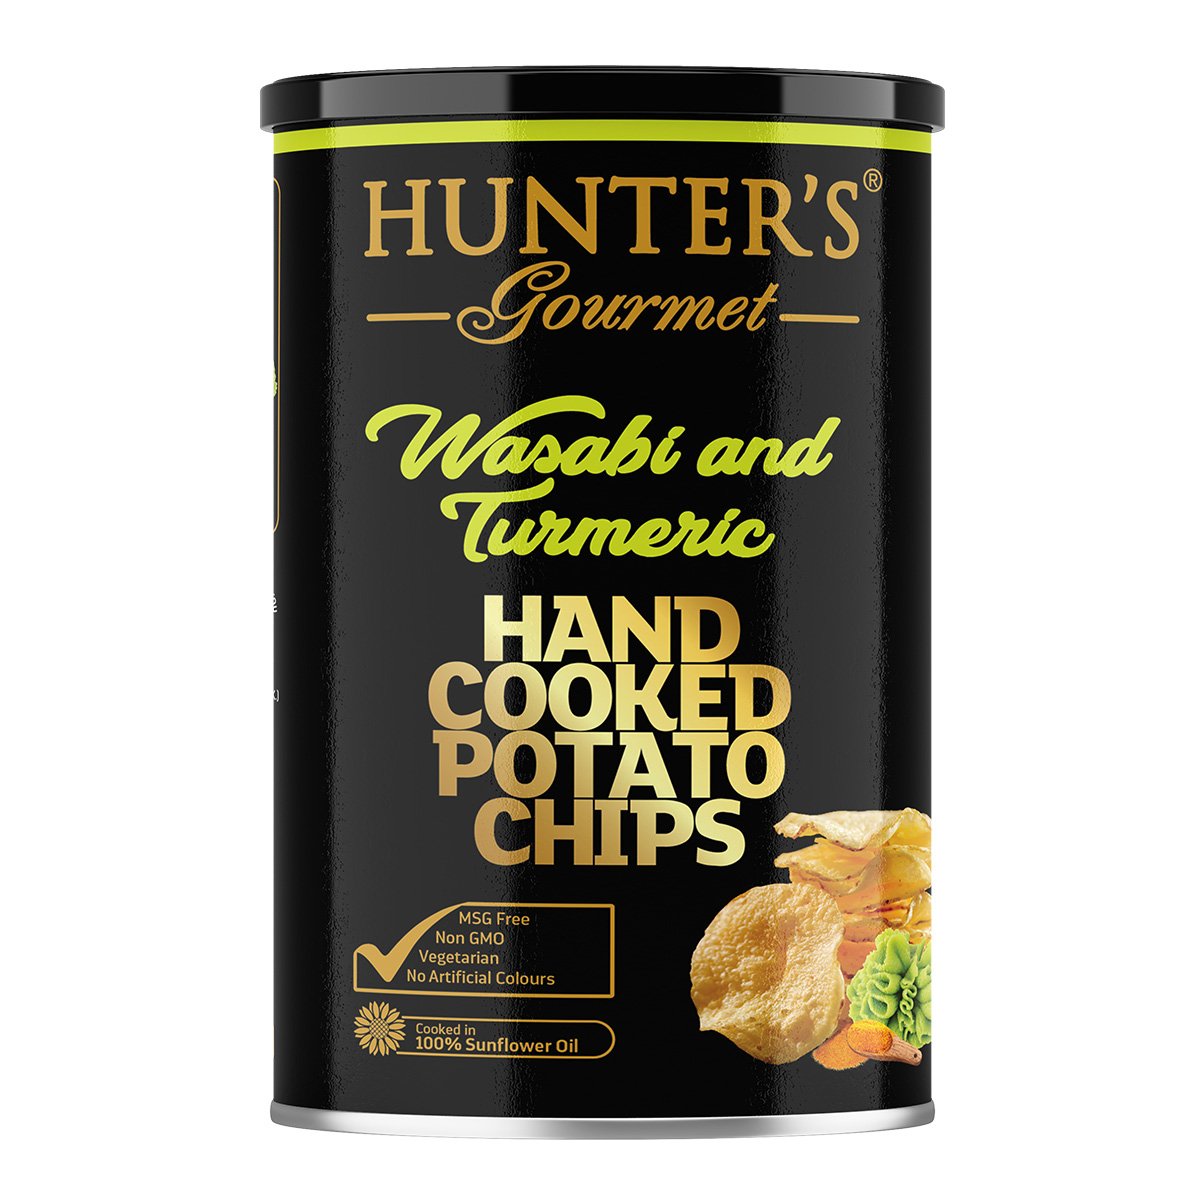 HUNTER'S GOURMET Hand Cooked Potato Chips Wasabi and Turmeric,150g